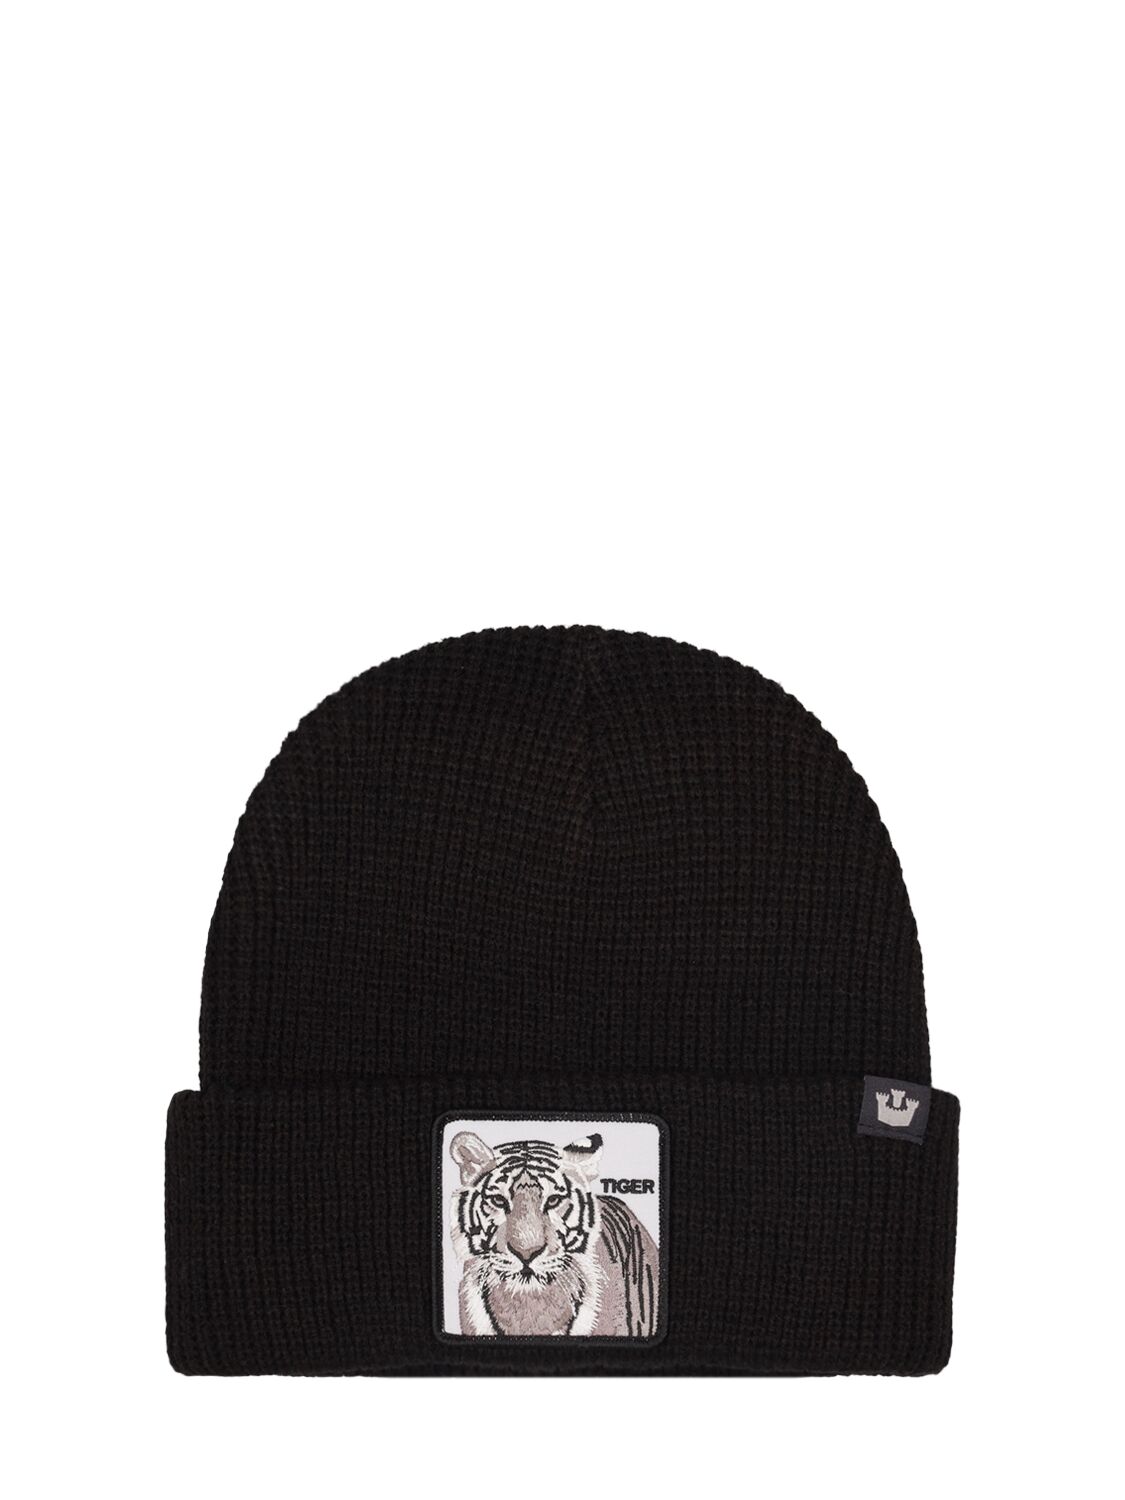 Image of Stripes Earned Knit Beanie